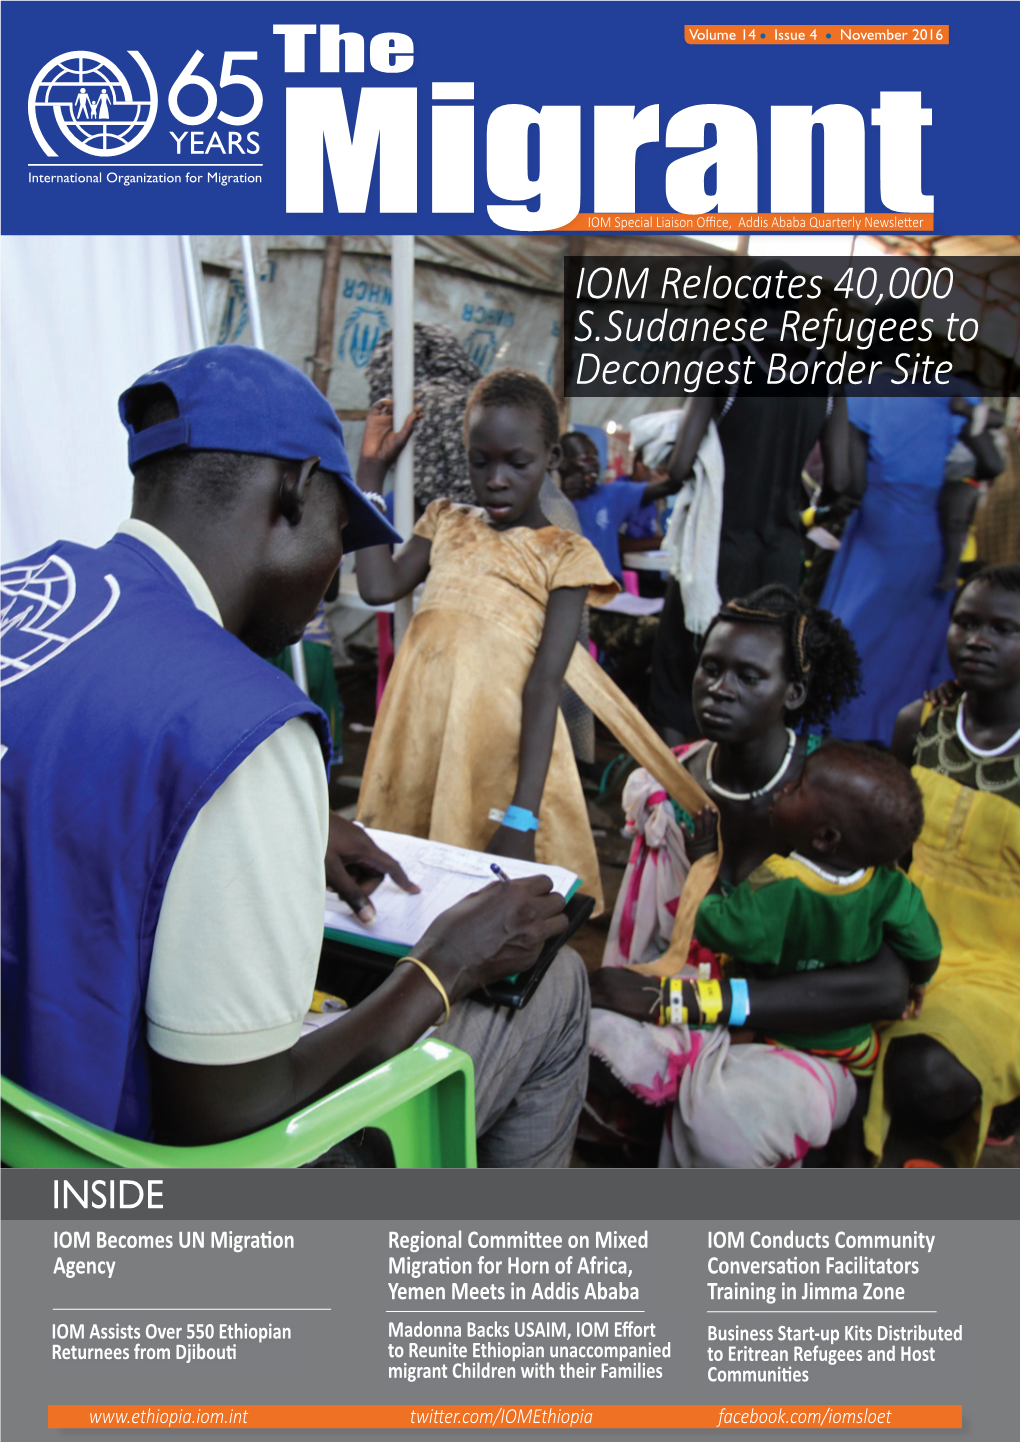 Migrantiom Special Liaison Office, Addis Ababa Quarterly Newsletter IOM Relocates 40,000 S.Sudanese Refugees to Decongest Border Site